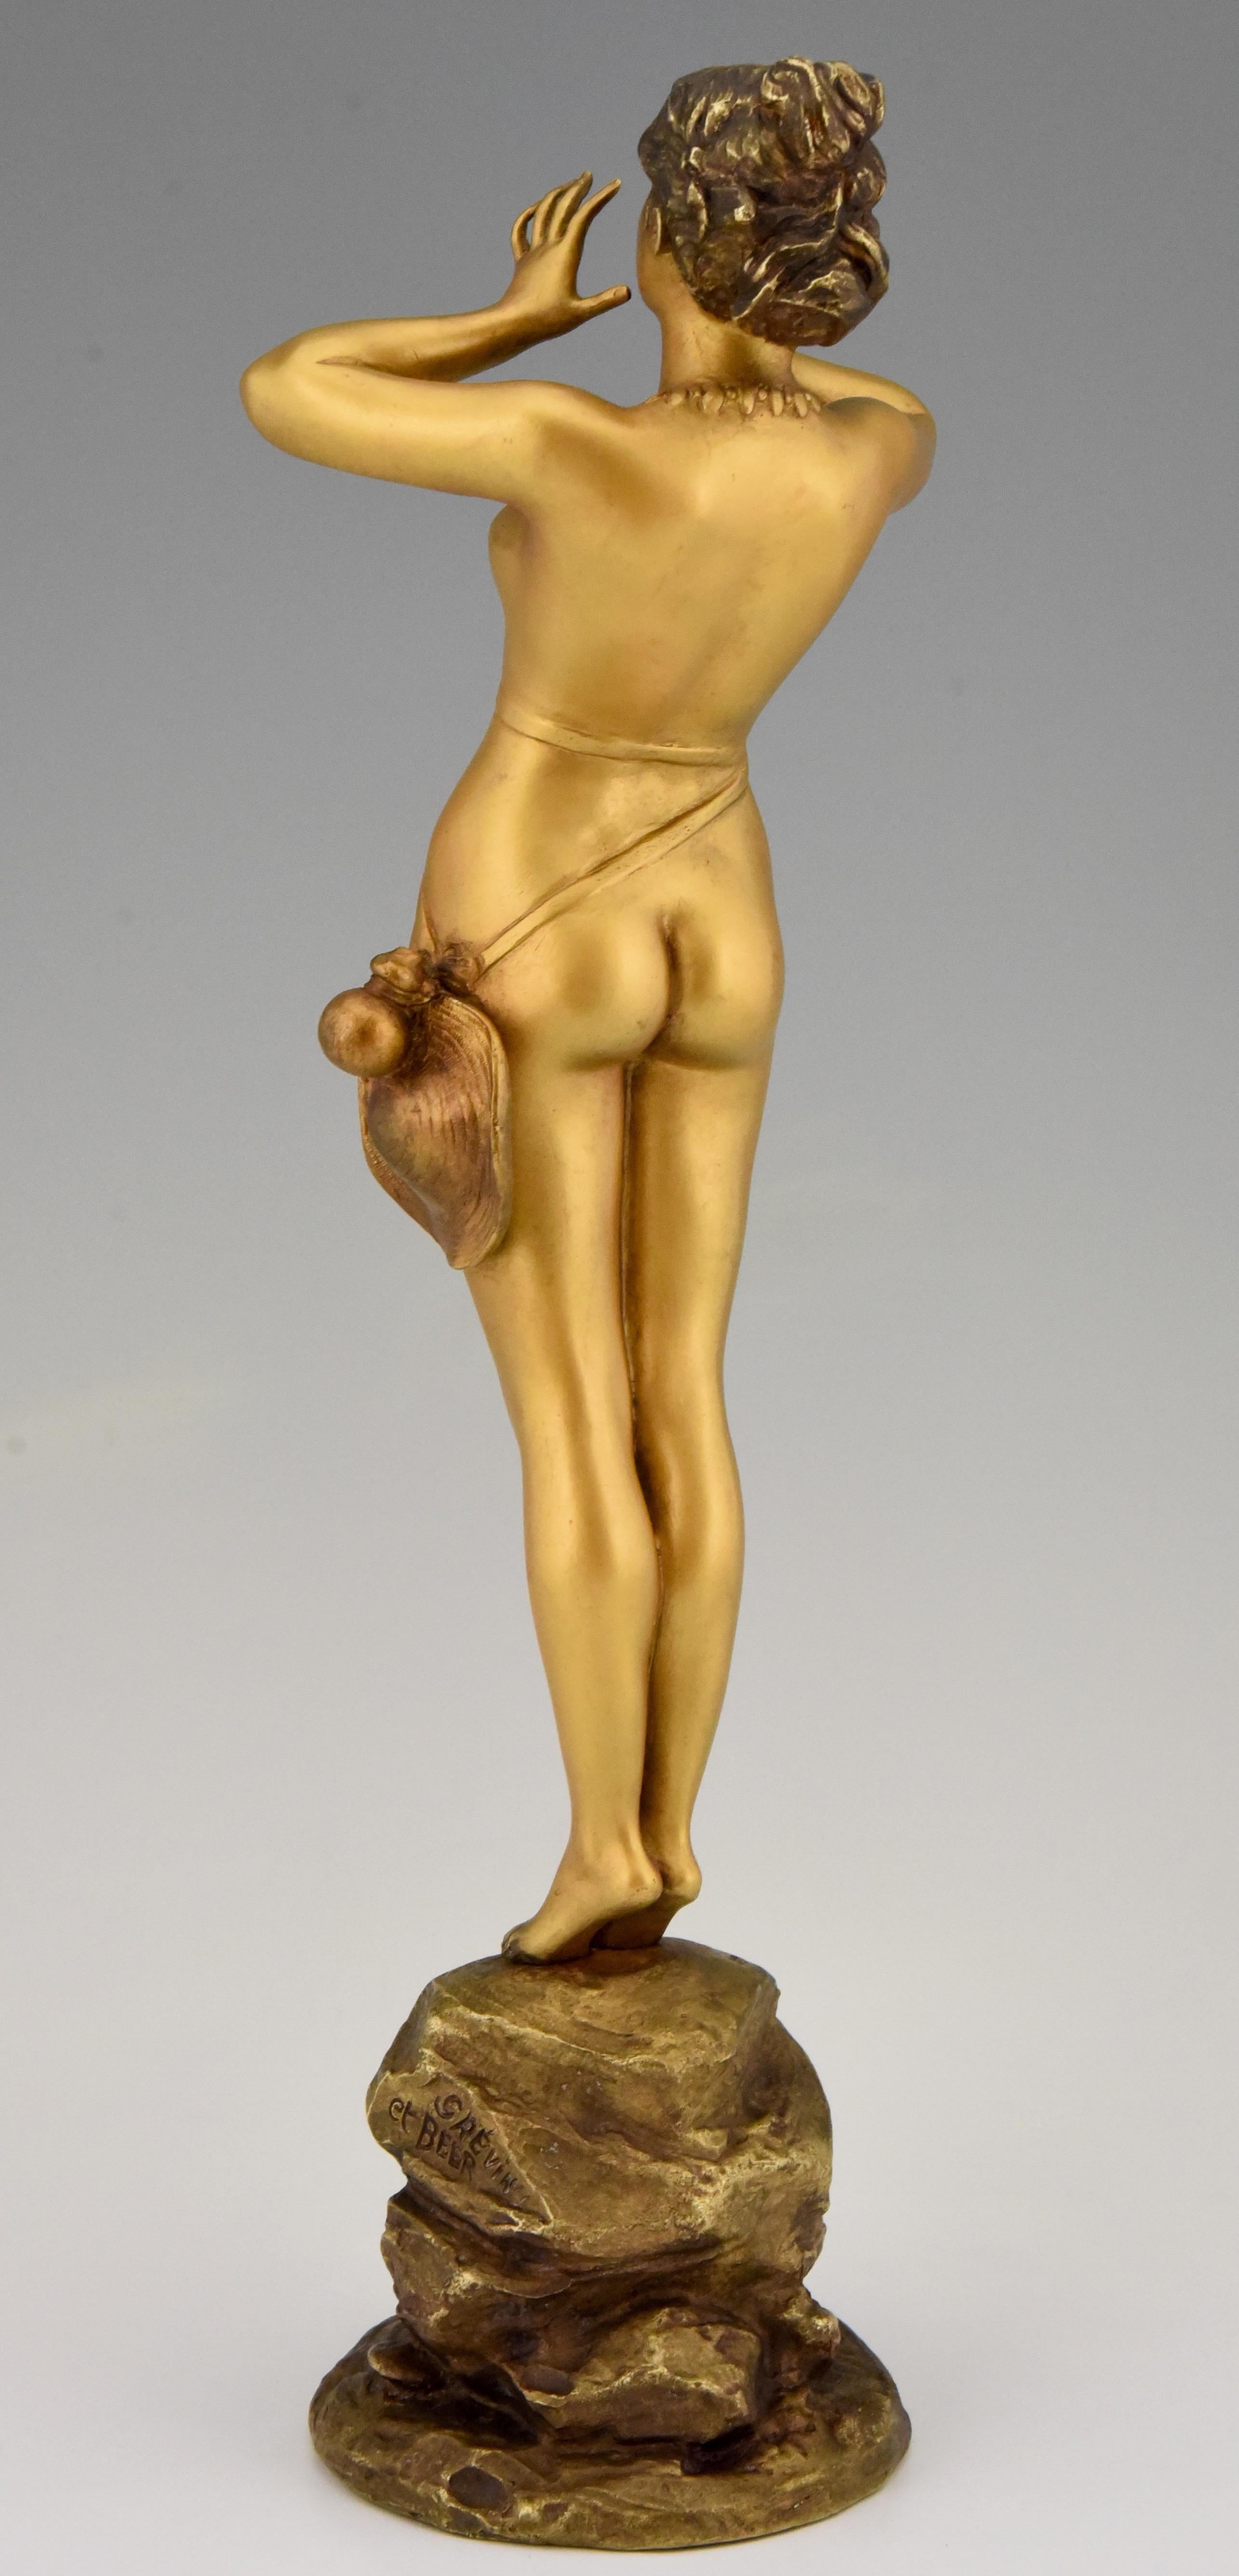 Patinated Art Nouveau Bronze Sculpture Calling Nude Lady Alfred Grevin and Friedrich Beer